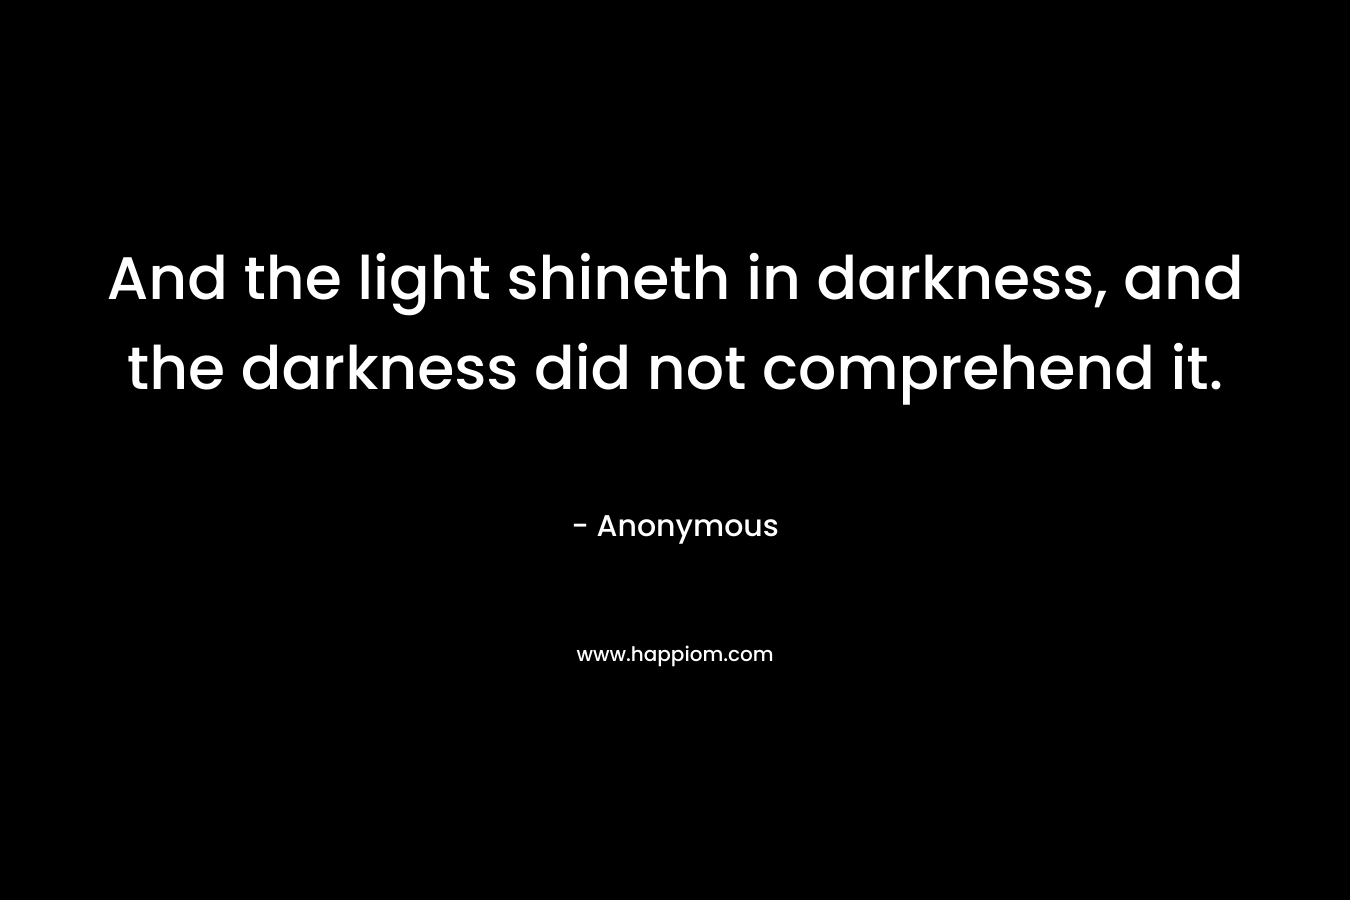 And the light shineth in darkness, and the darkness did not comprehend it.